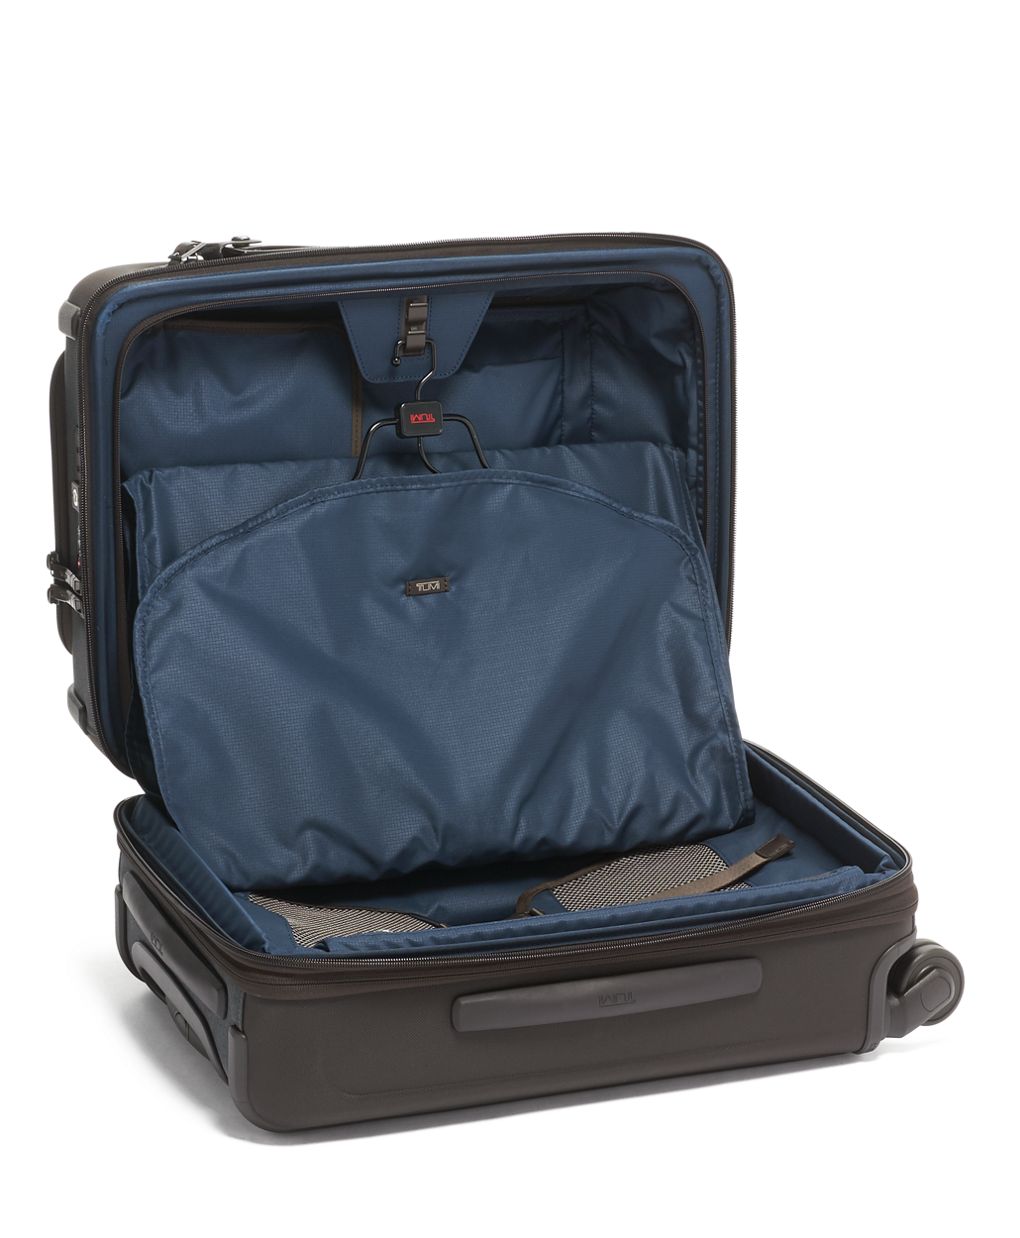 Tumi Alpha 3 Anthracite International Dual Access 4 Wheeled Carry-On